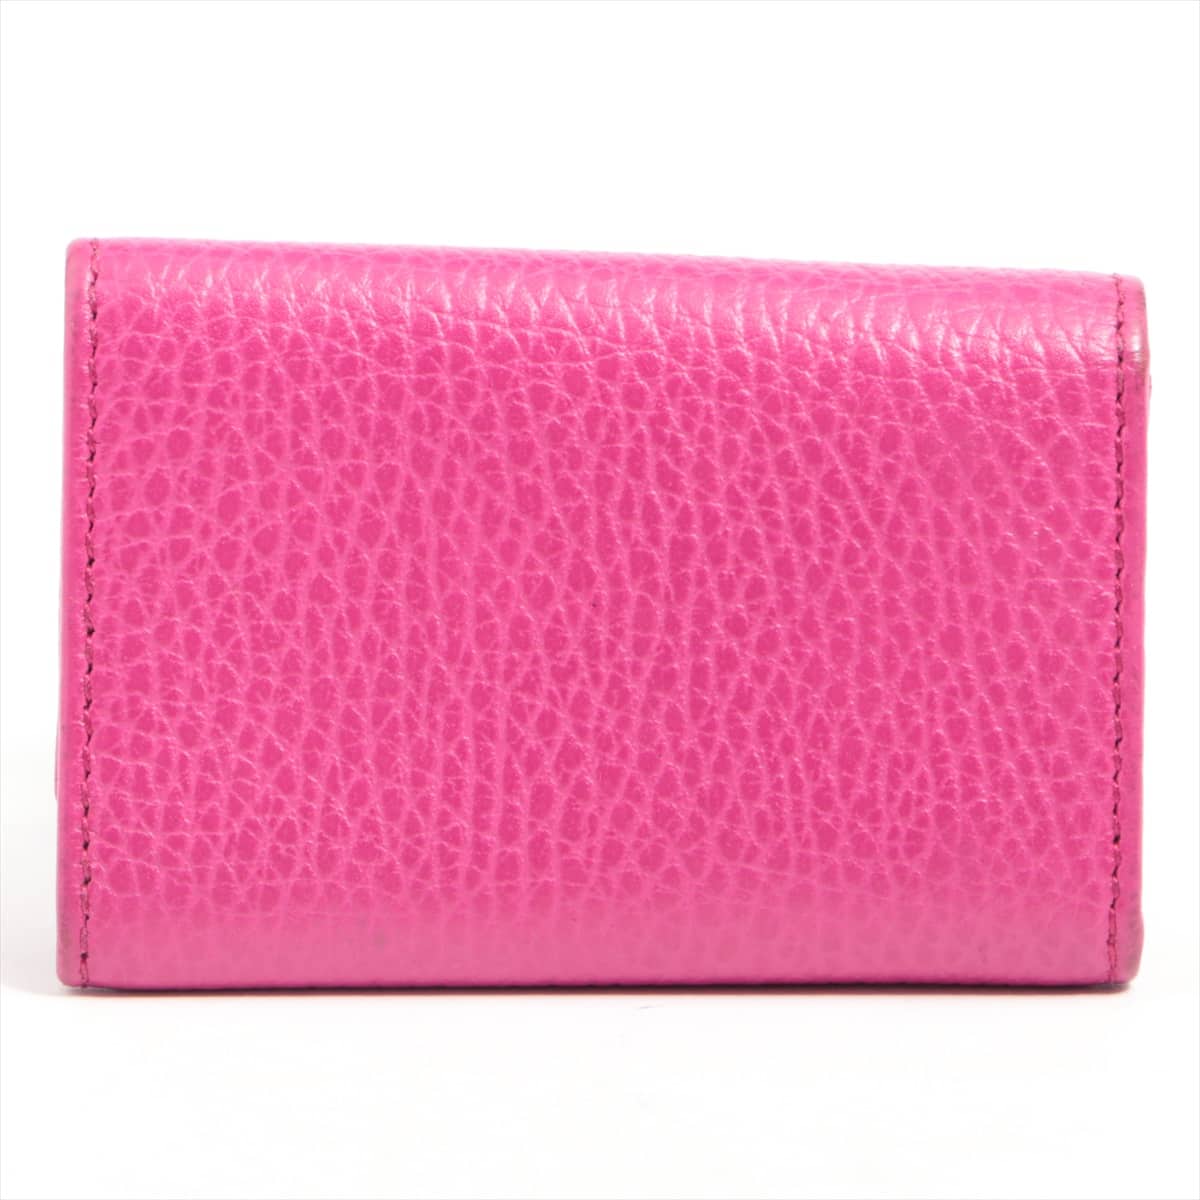 Gucci Swing 354499 Leather Key case Pink